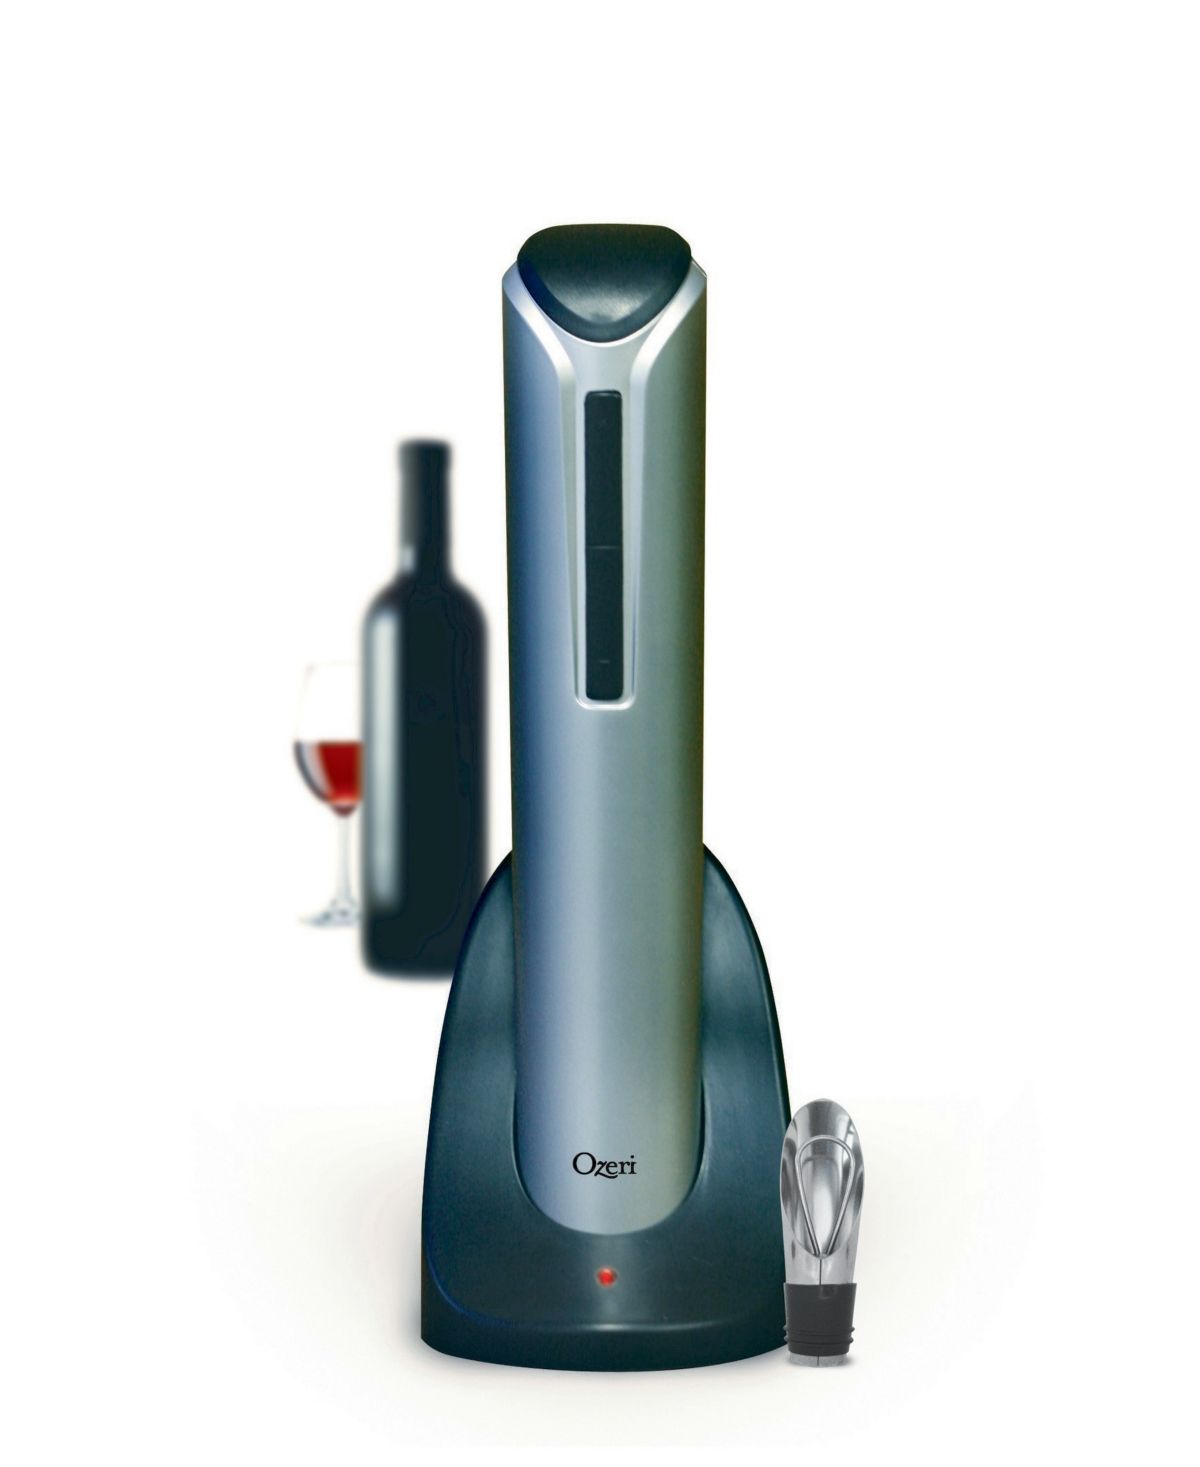 Ozeri Pro Electric Wine Bottle Opener with Pourer, Stopper and Foil Cutter | Macys (US)